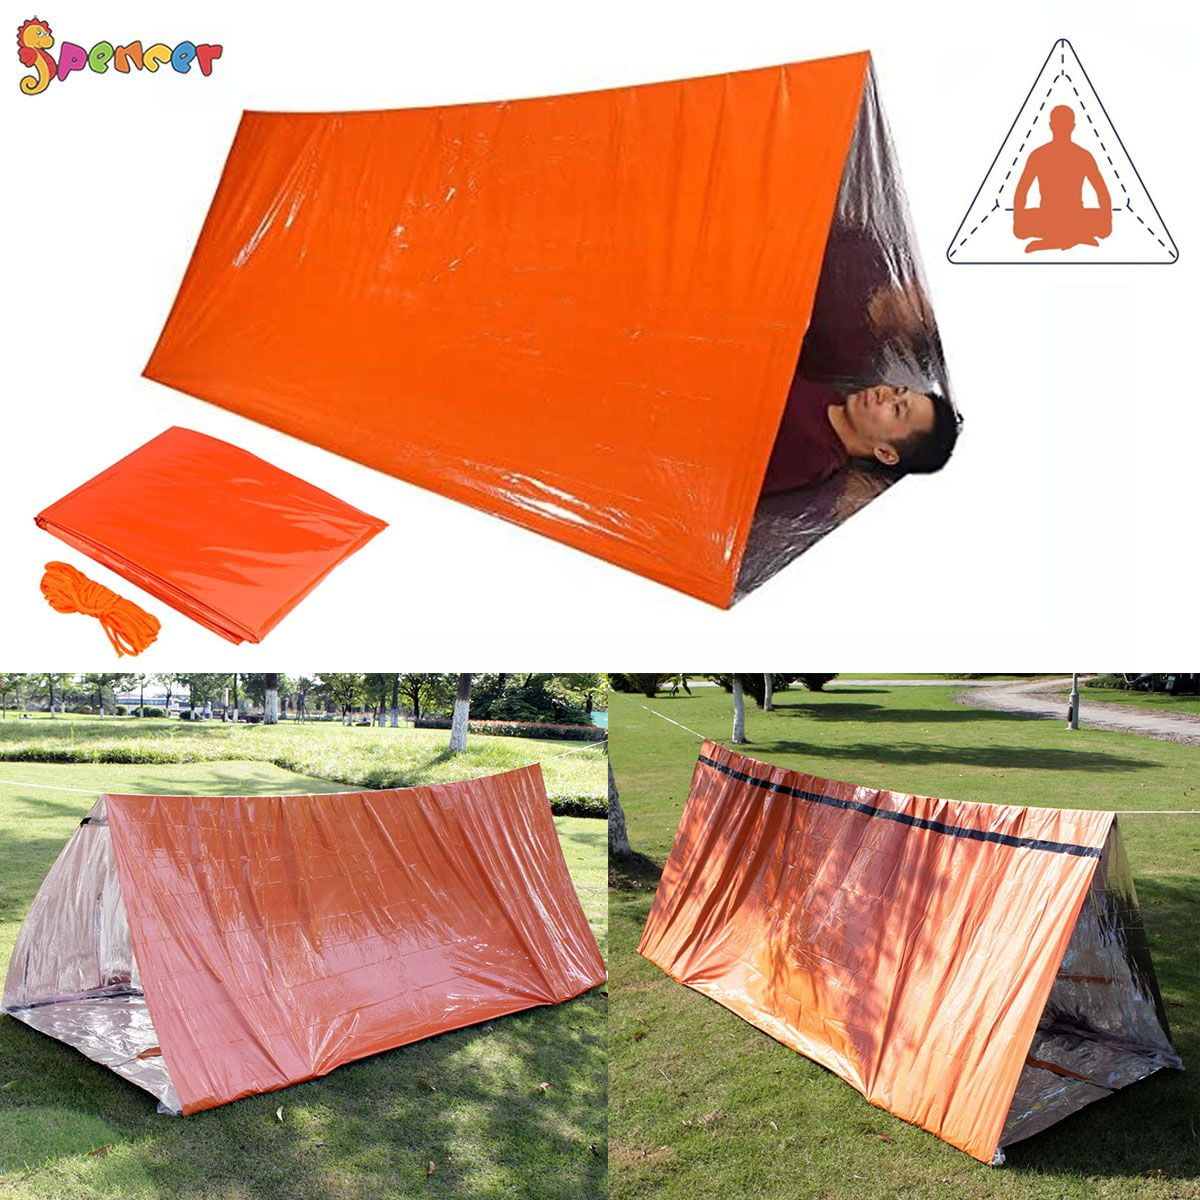 Tenflyer Emergency Tent Tube Survival Camping Shelter Emergencies Sporting Outdoor New